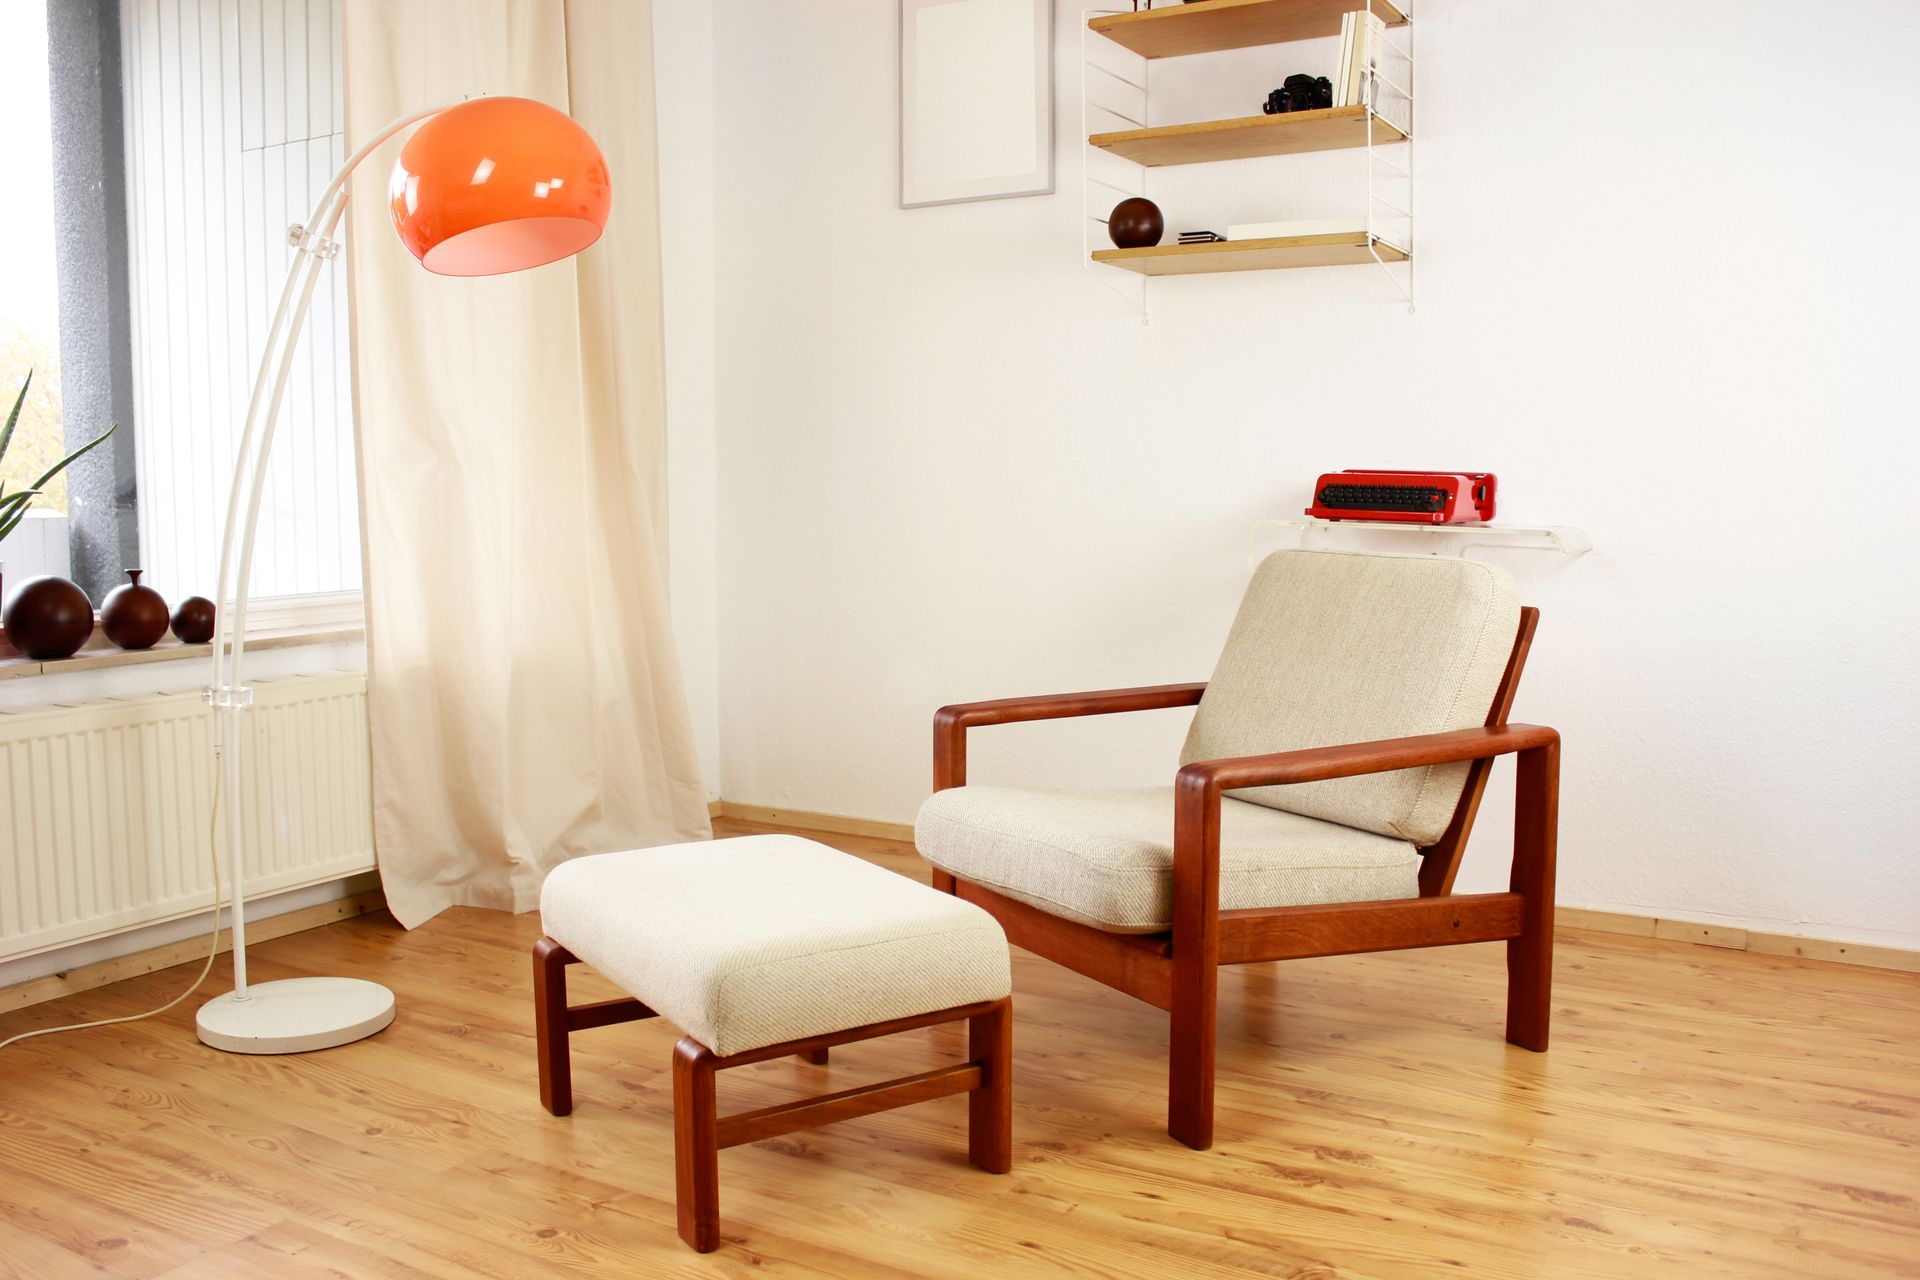 midcentury modern chair and ottoman in a room with a red clock on the wall